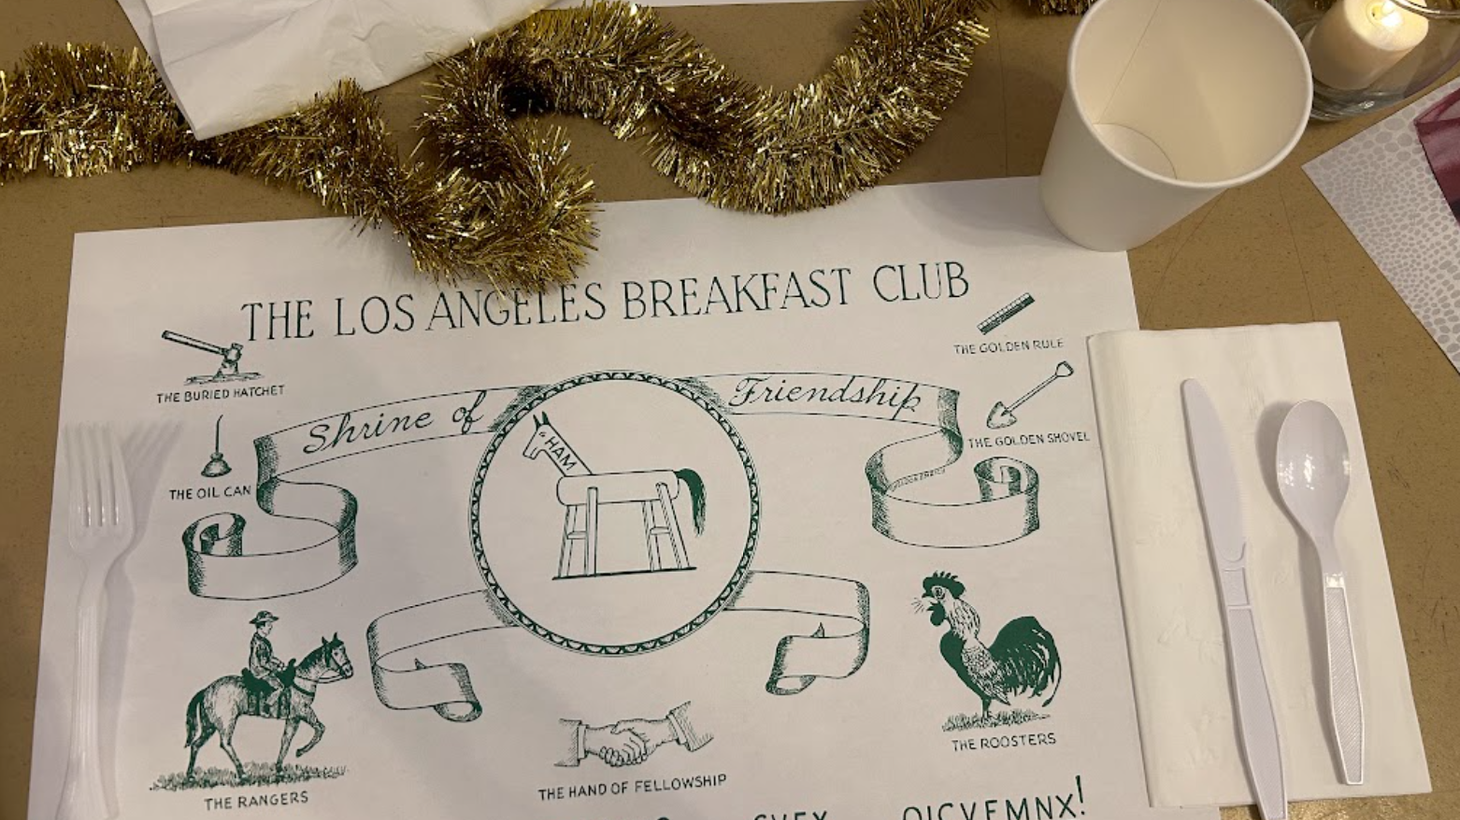 The quirky Los Angeles Breakfast Club has been gathering early morning meetings for nearly a century.